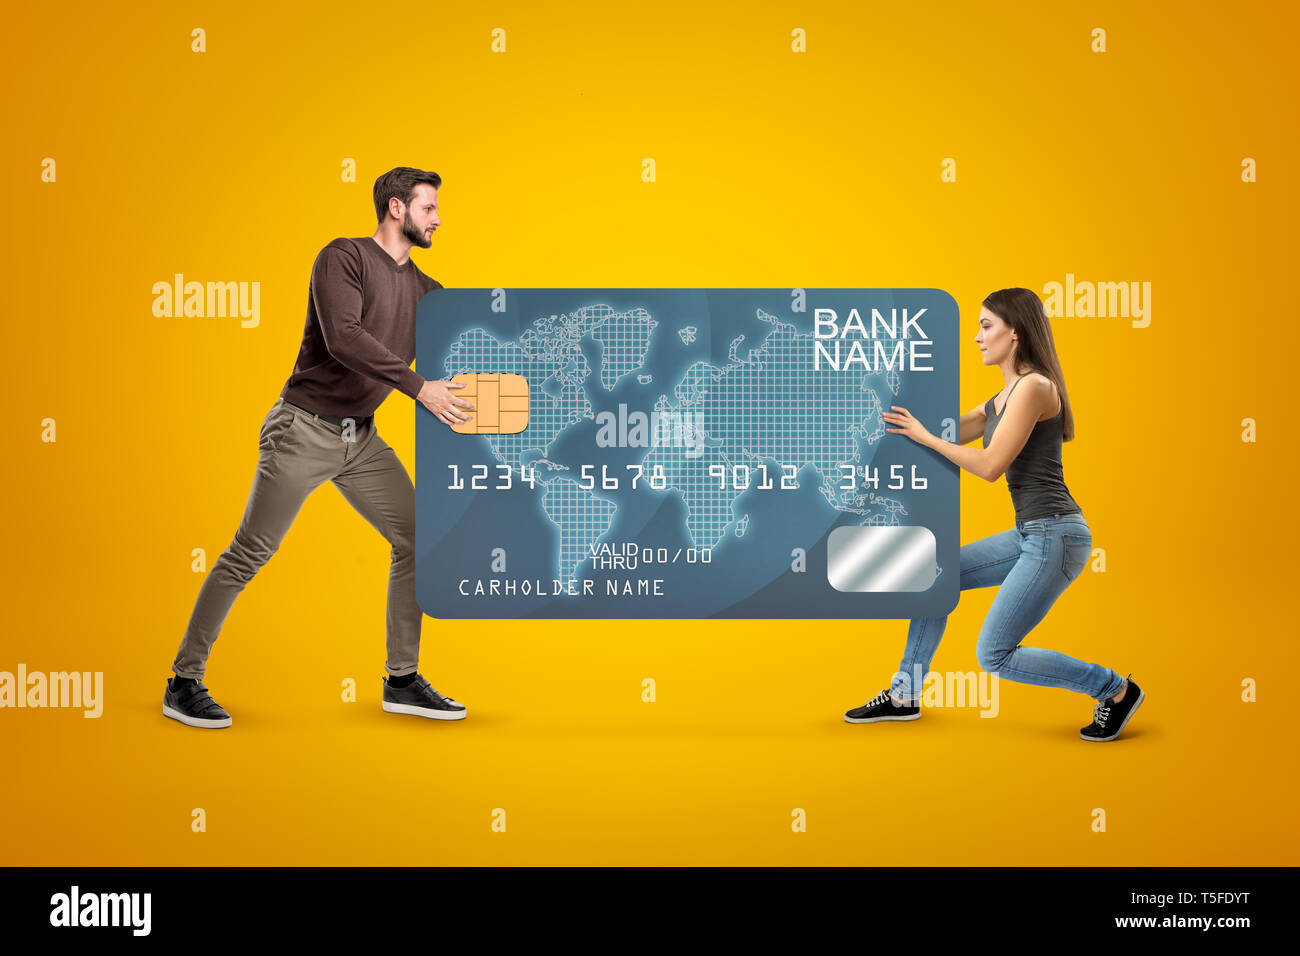 Young man and woman in casual clothes carrying a big plastic bank card on yellow background Stock Photo